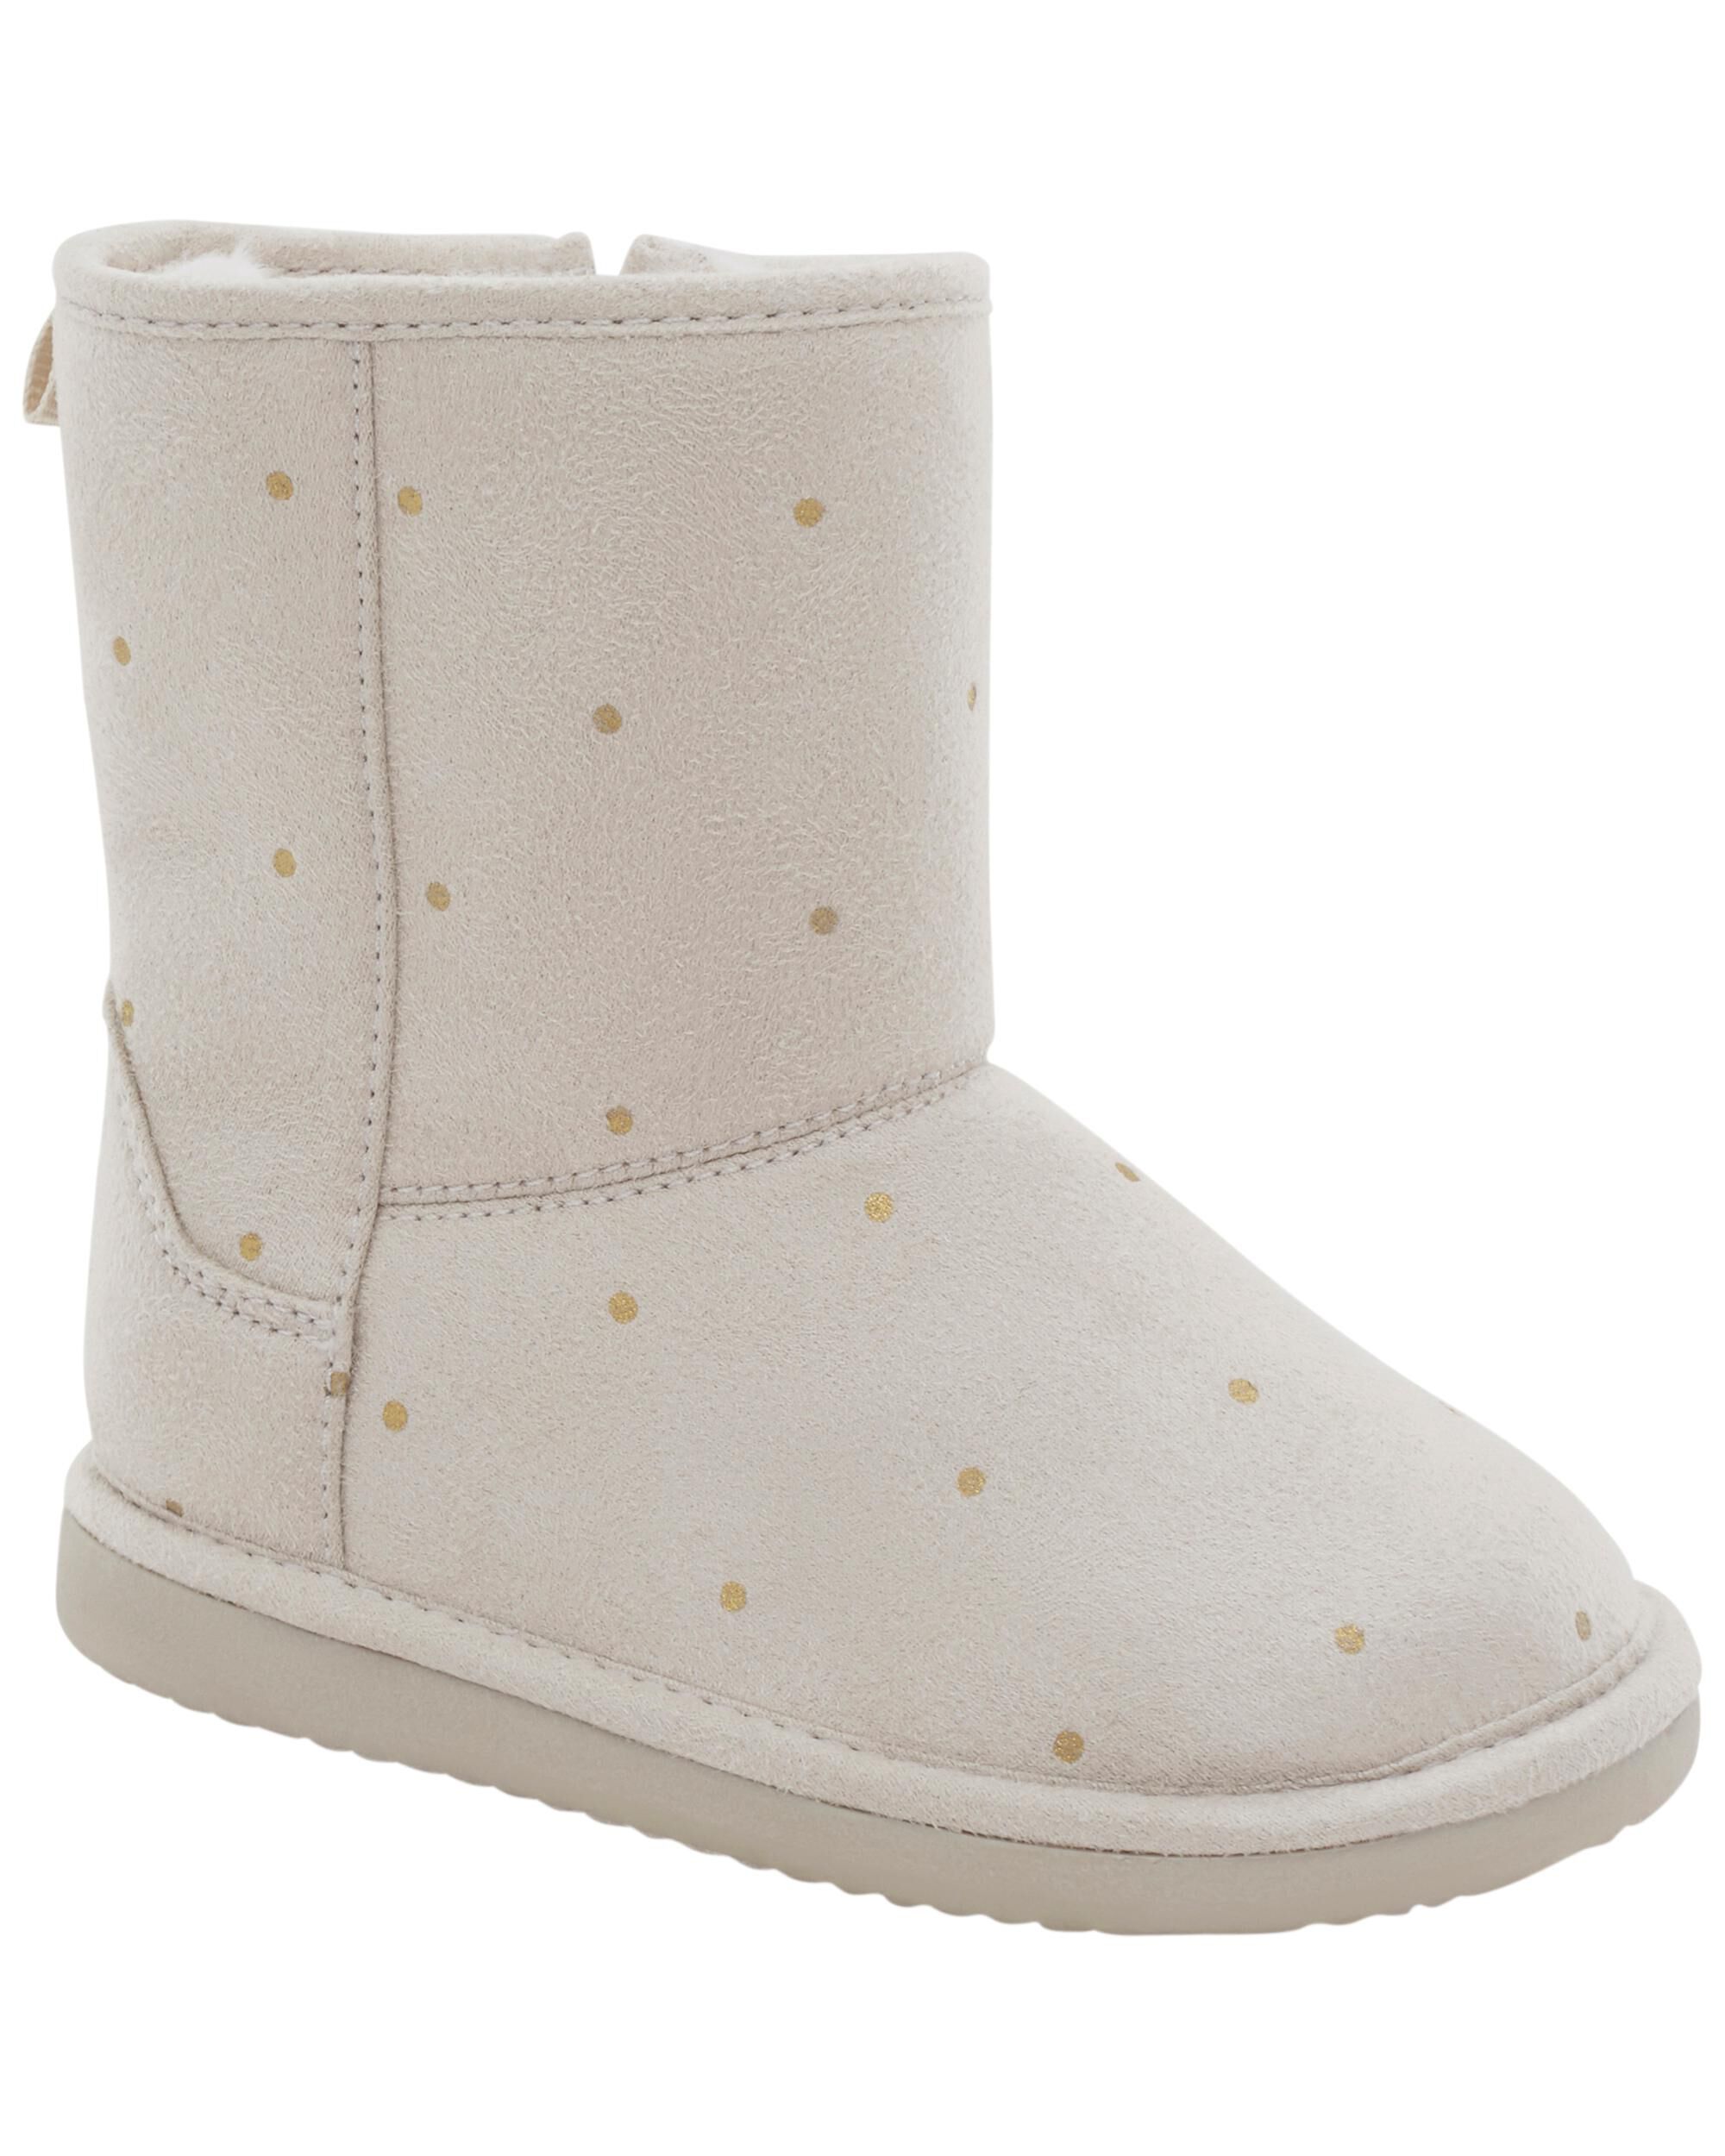 Carters Suede Slip-On Fashion Boots